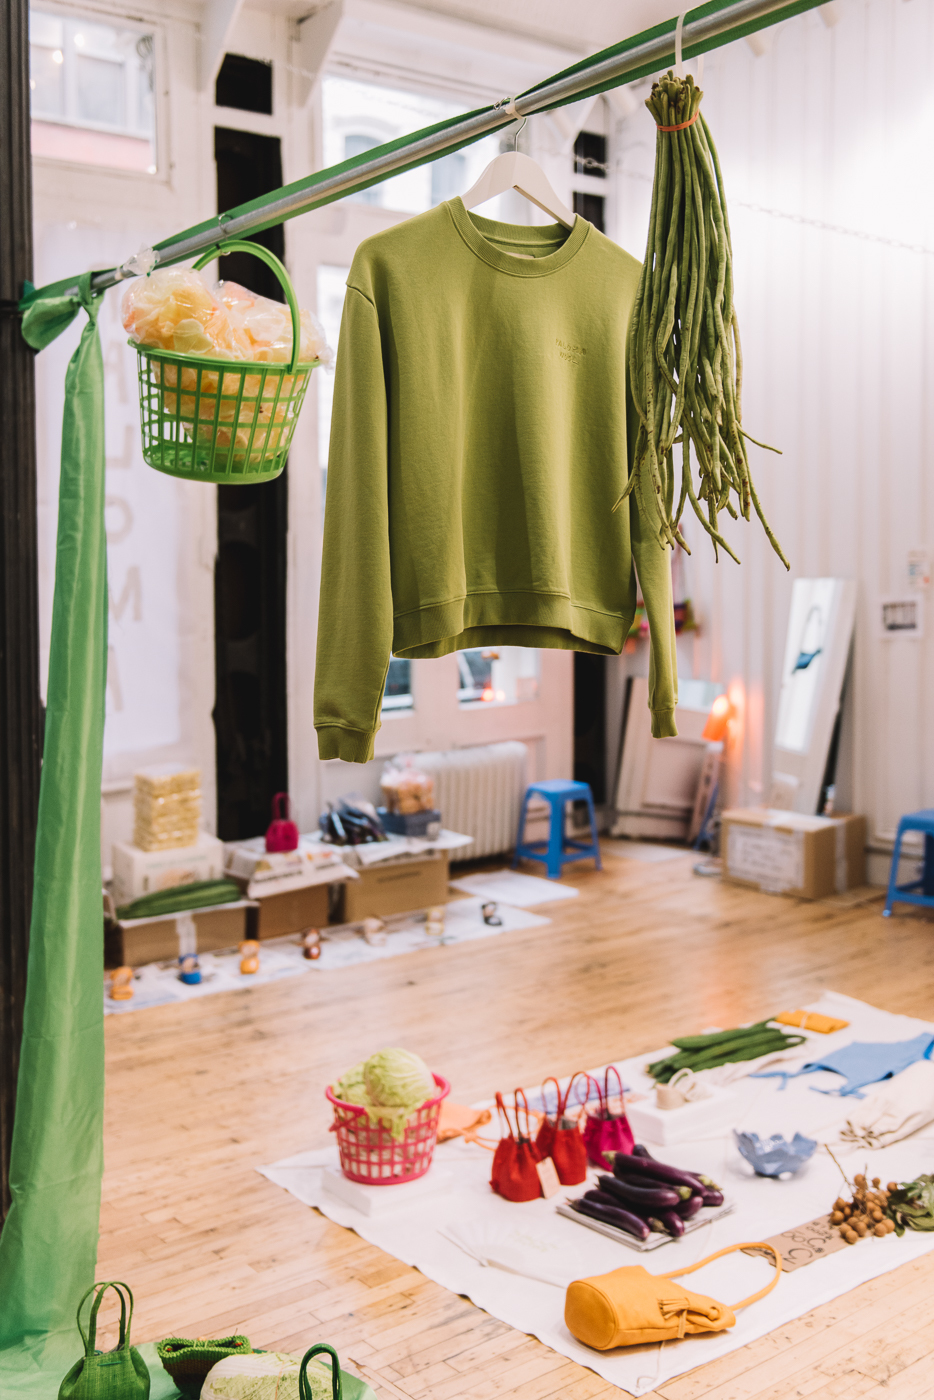 Paloma Wool, pop up, how to build a pop up, New York pop up, things to see in New York, short-term retail